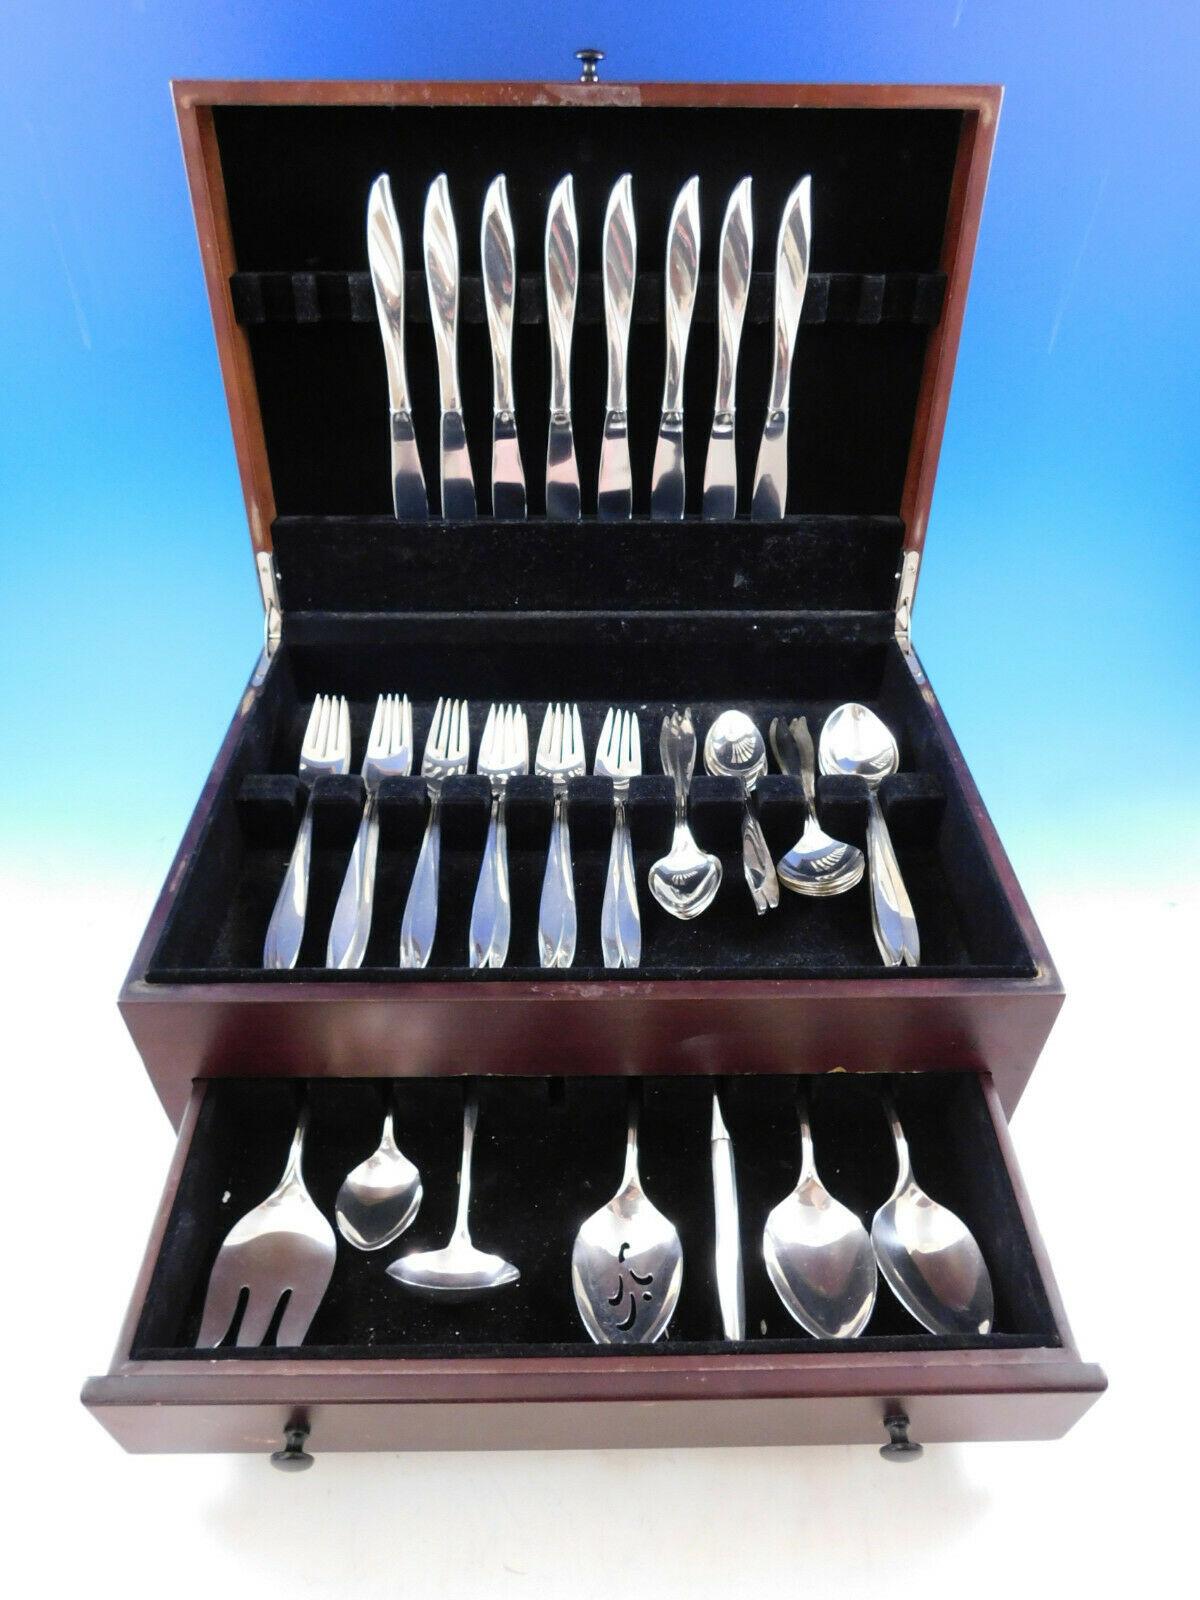 Vivant By Oneida sterling silver Flatware set - 47 pieces. This set includes:
 
8 knives, 9